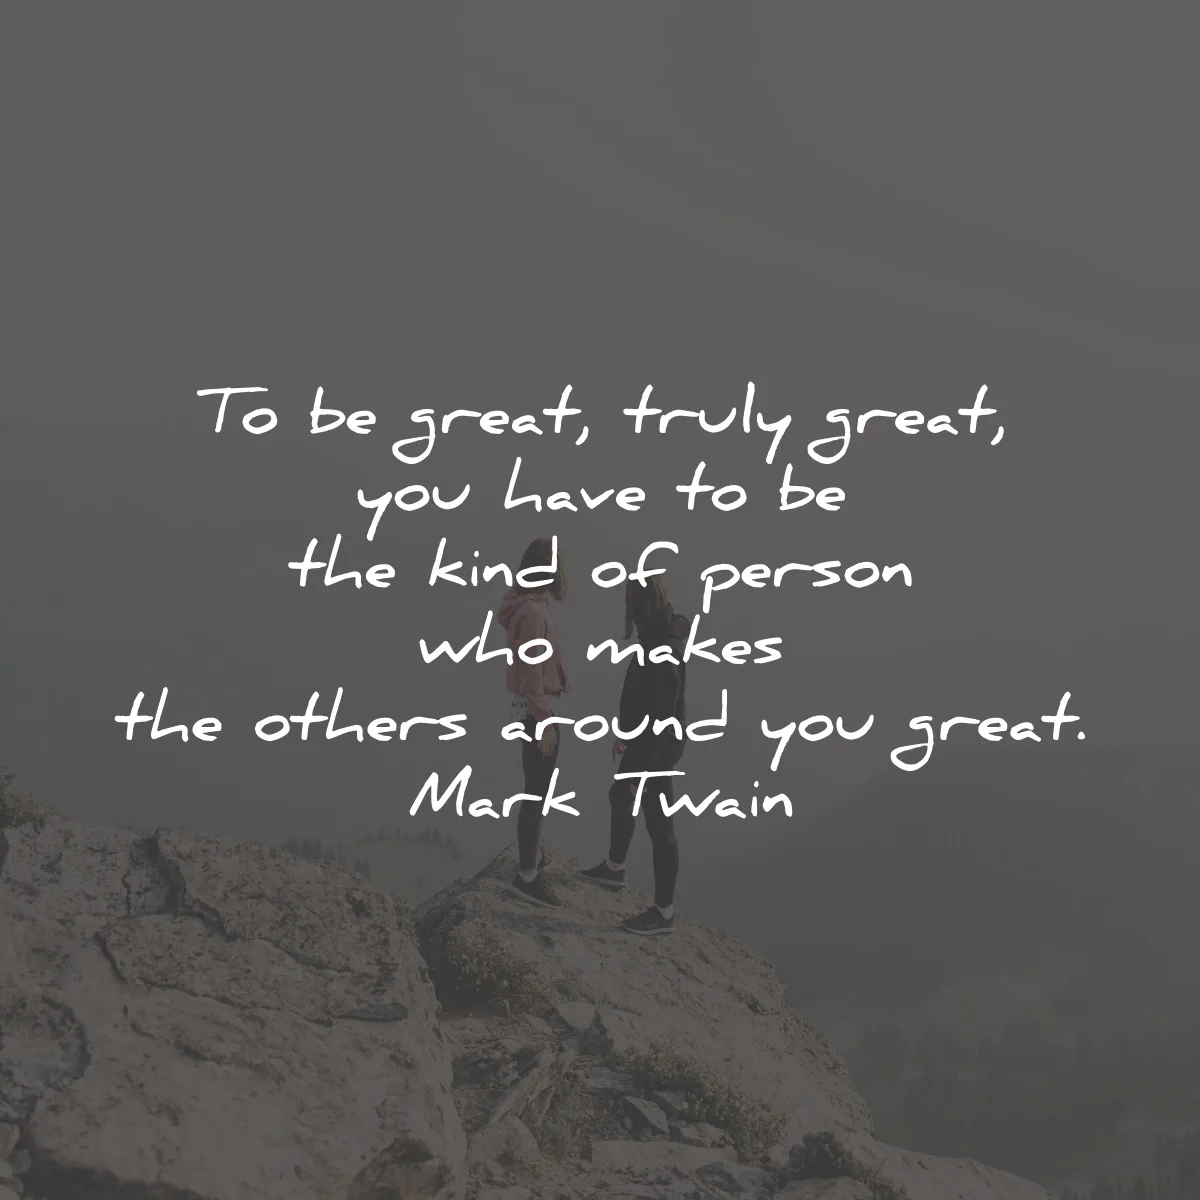 mark twain quotes great person others around wisdom